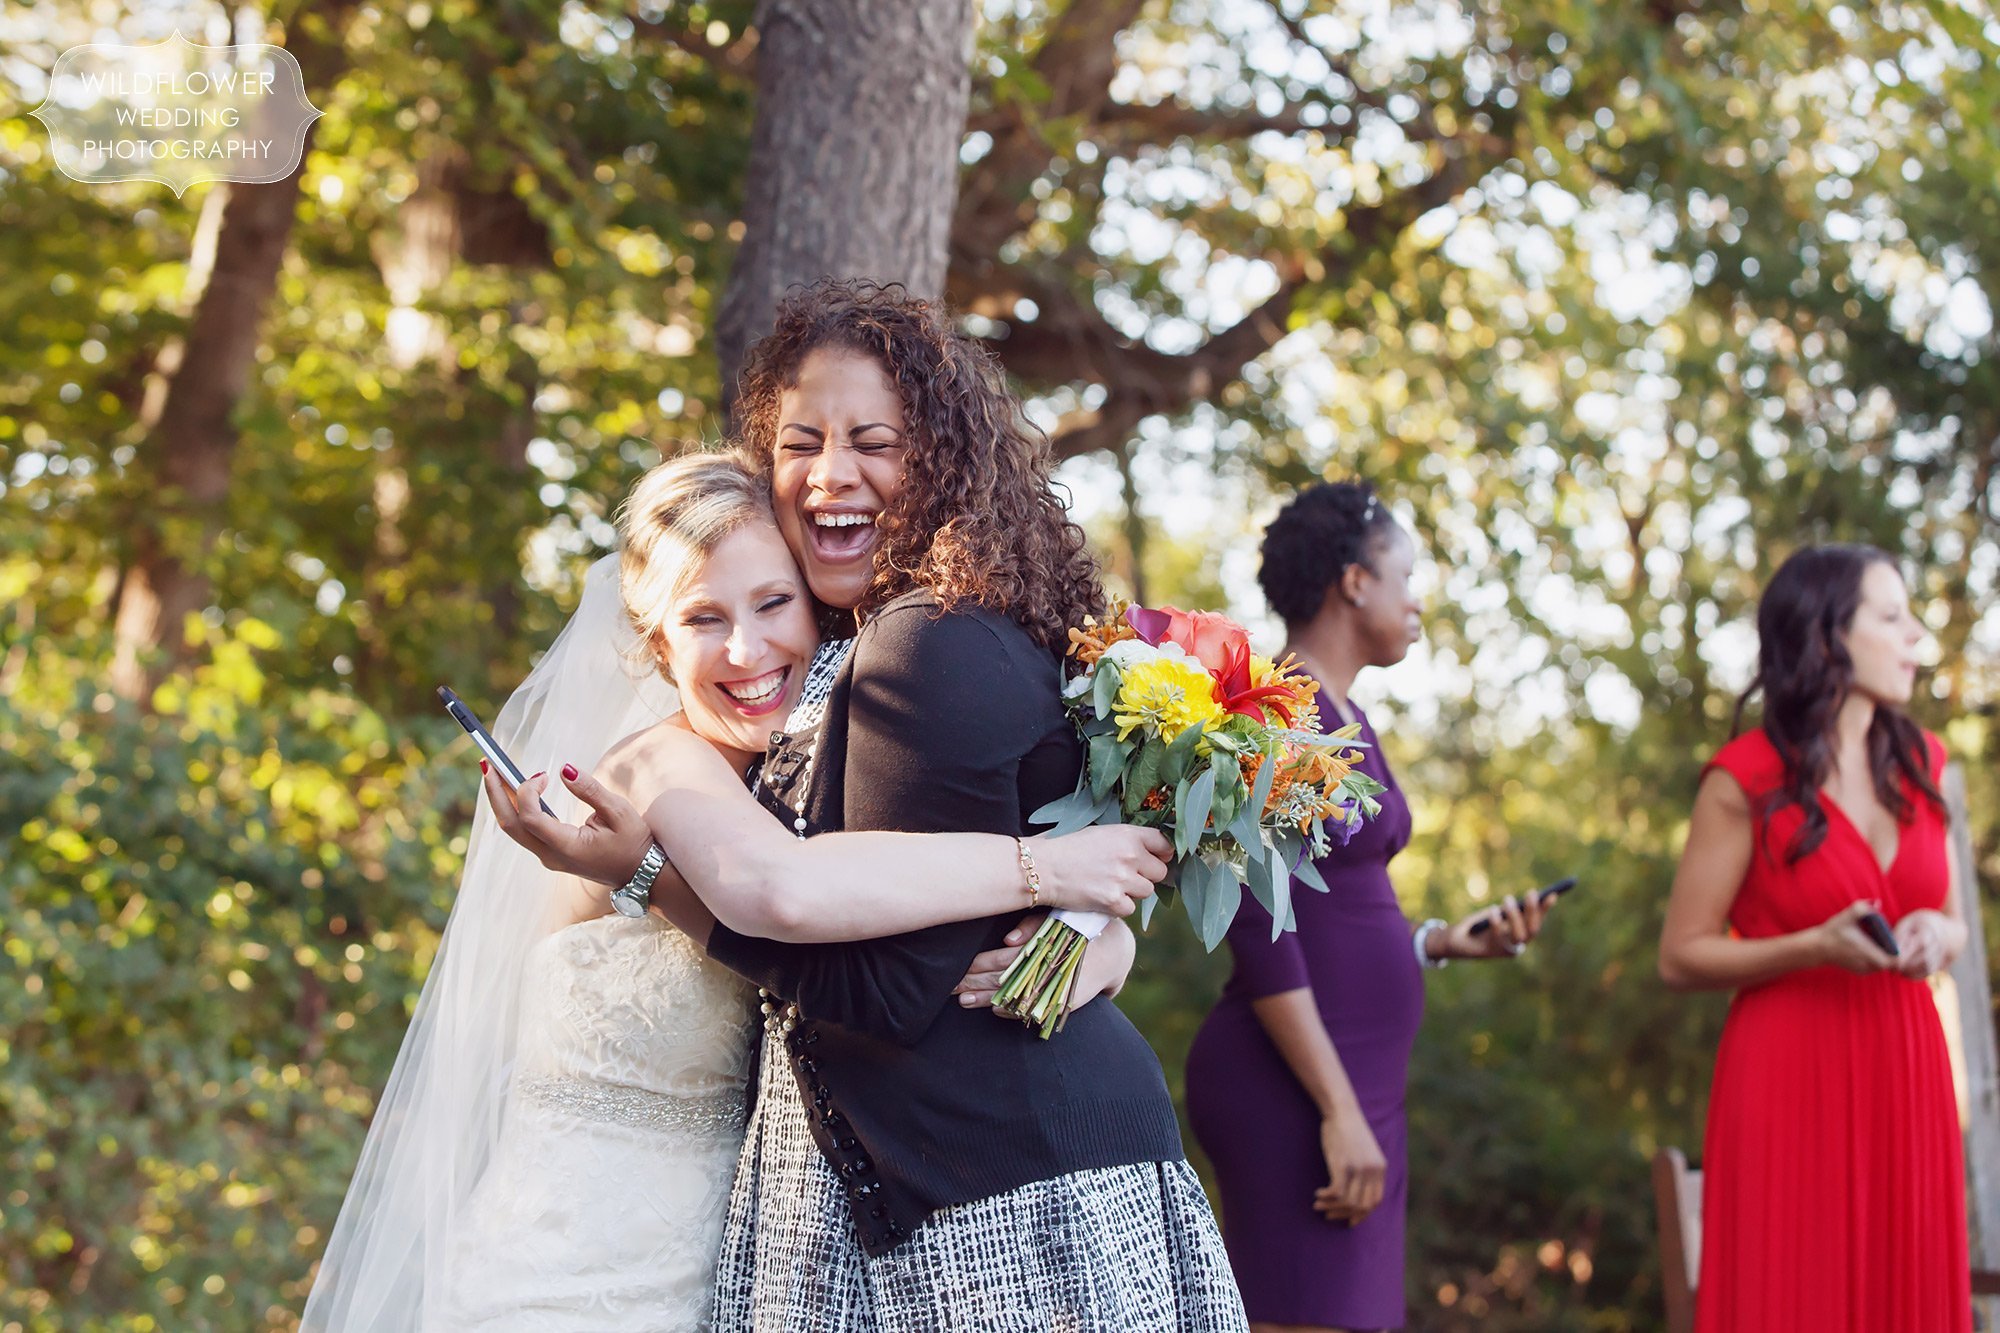 Great documentary wedding photo of the bride laughing and smiling with an old friend.